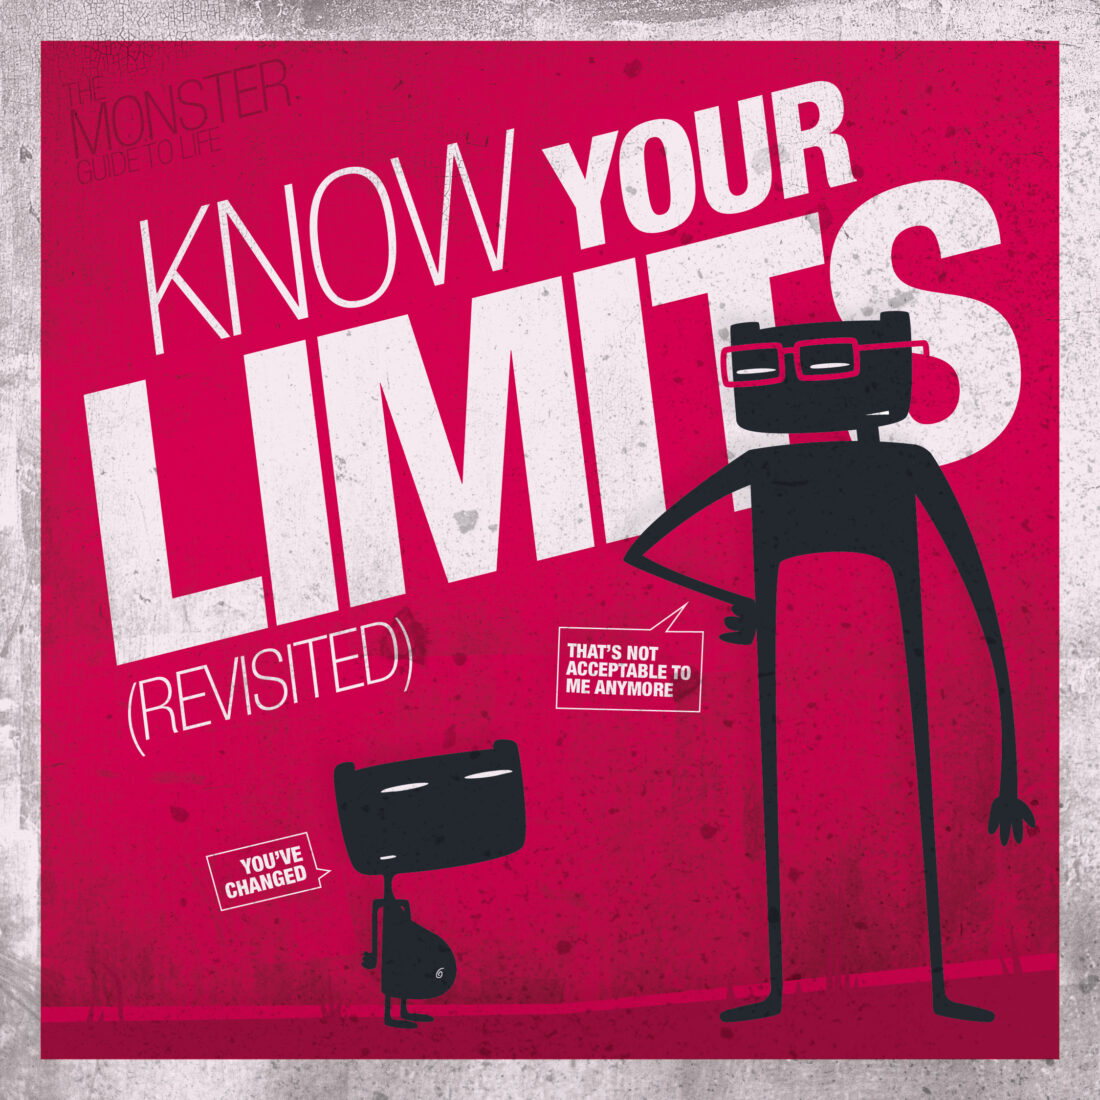 Know your limits (revisited)